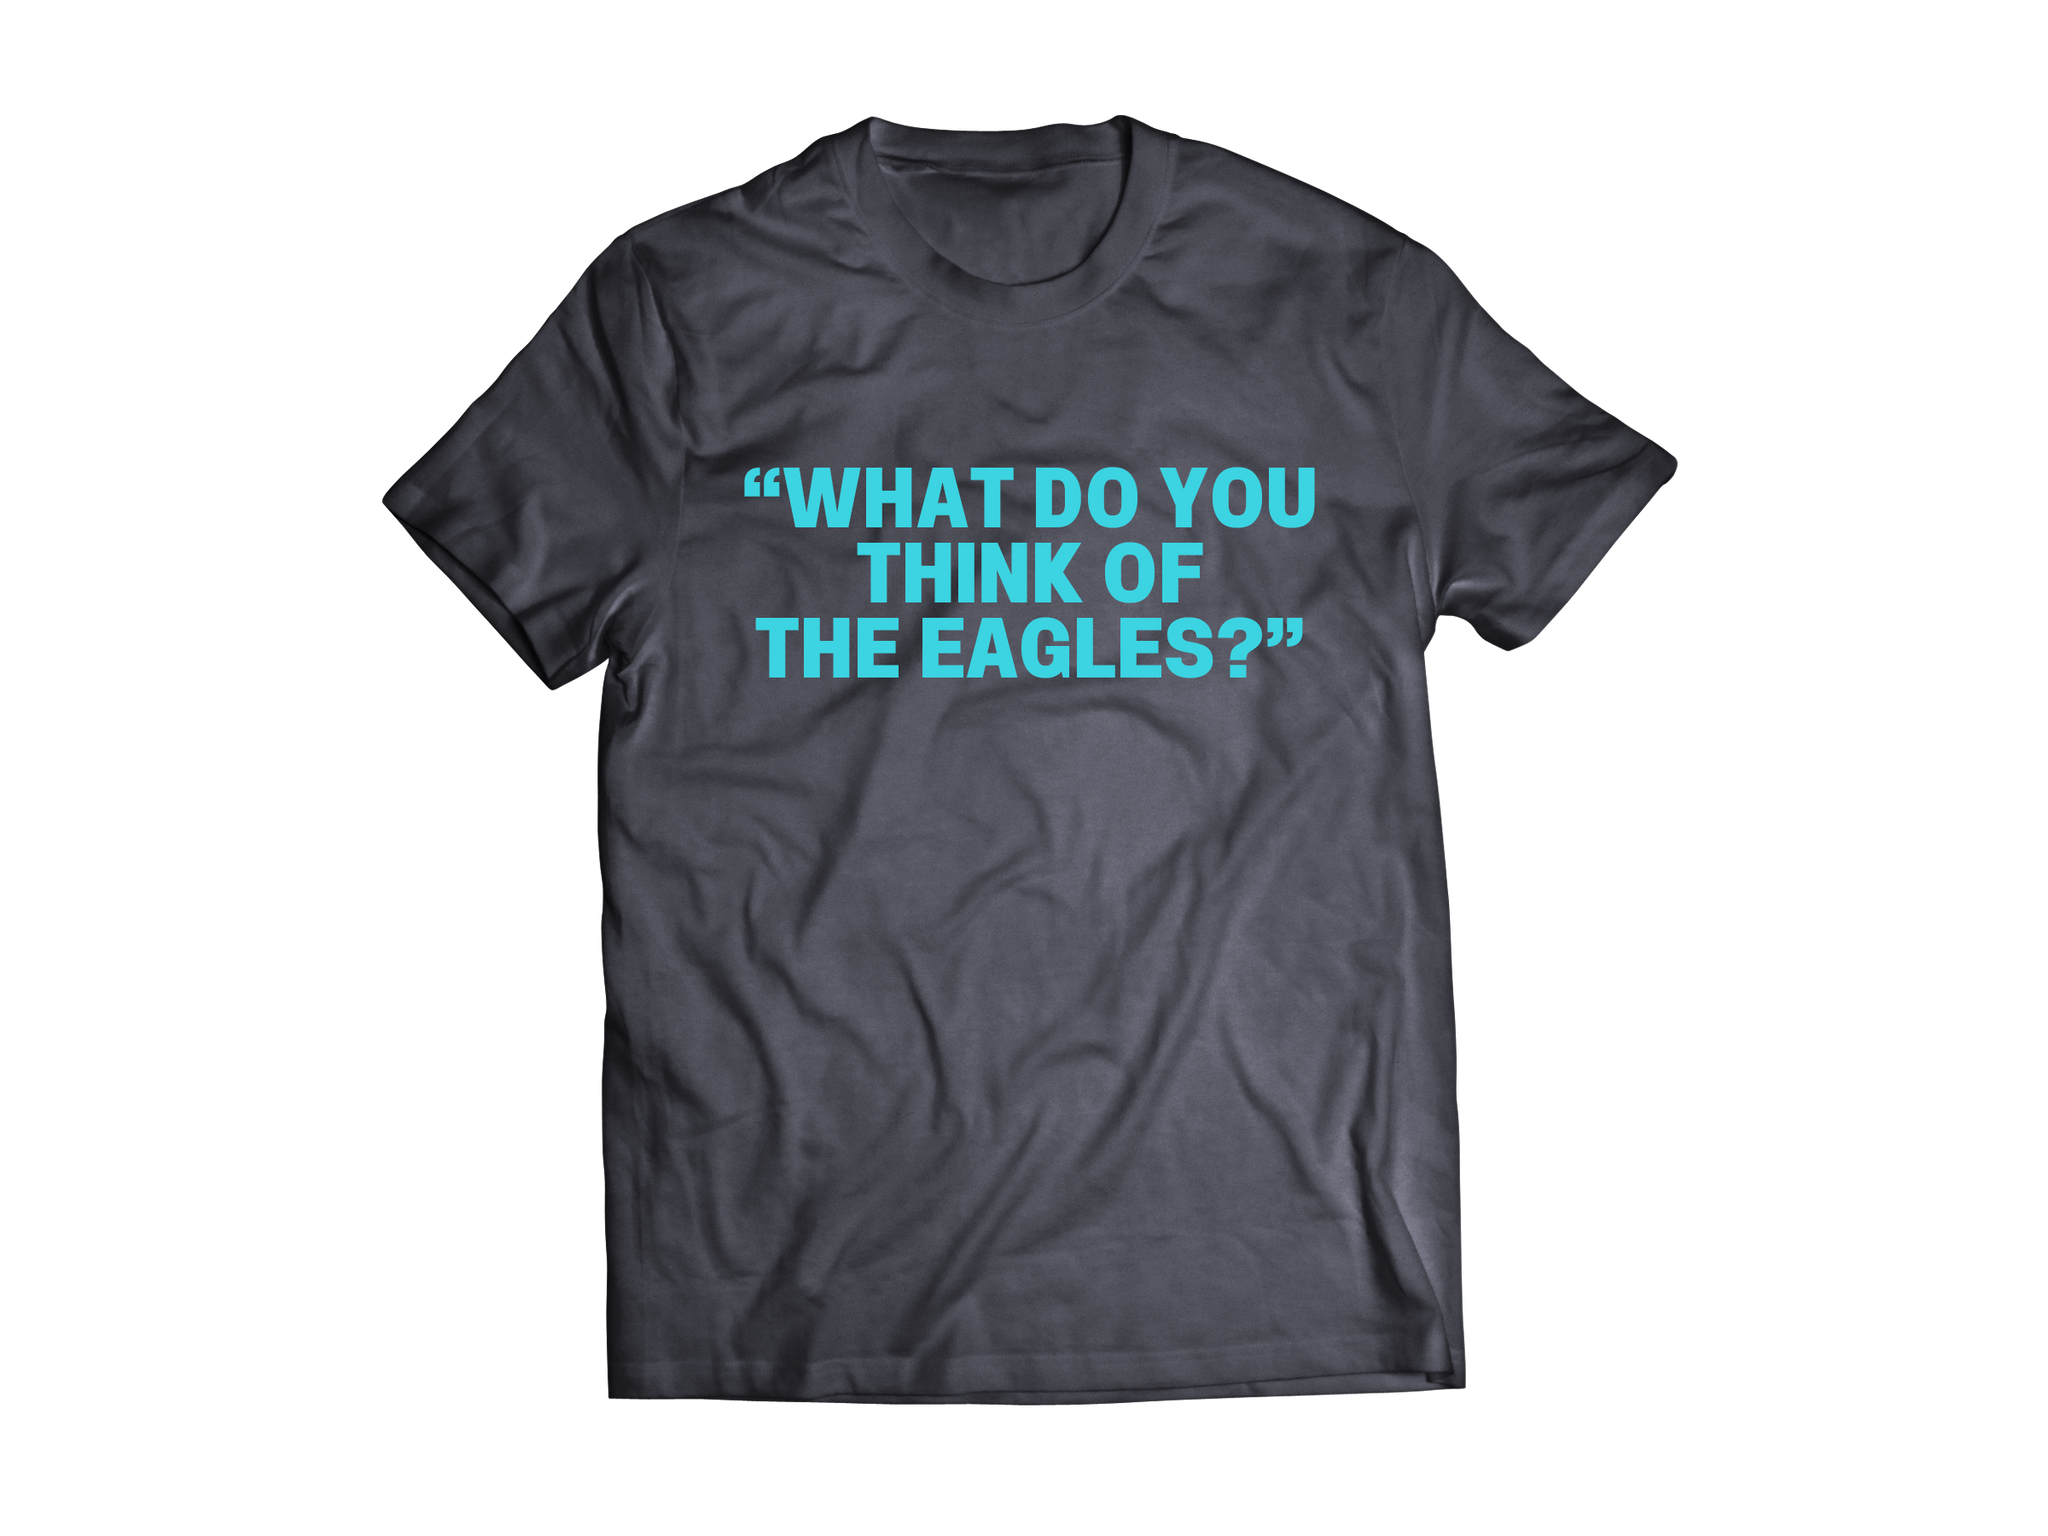 BRET EASTON ELLIS: "WHAT DO YOU THINK OF THE EAGLES?" GREY T-SHIRT